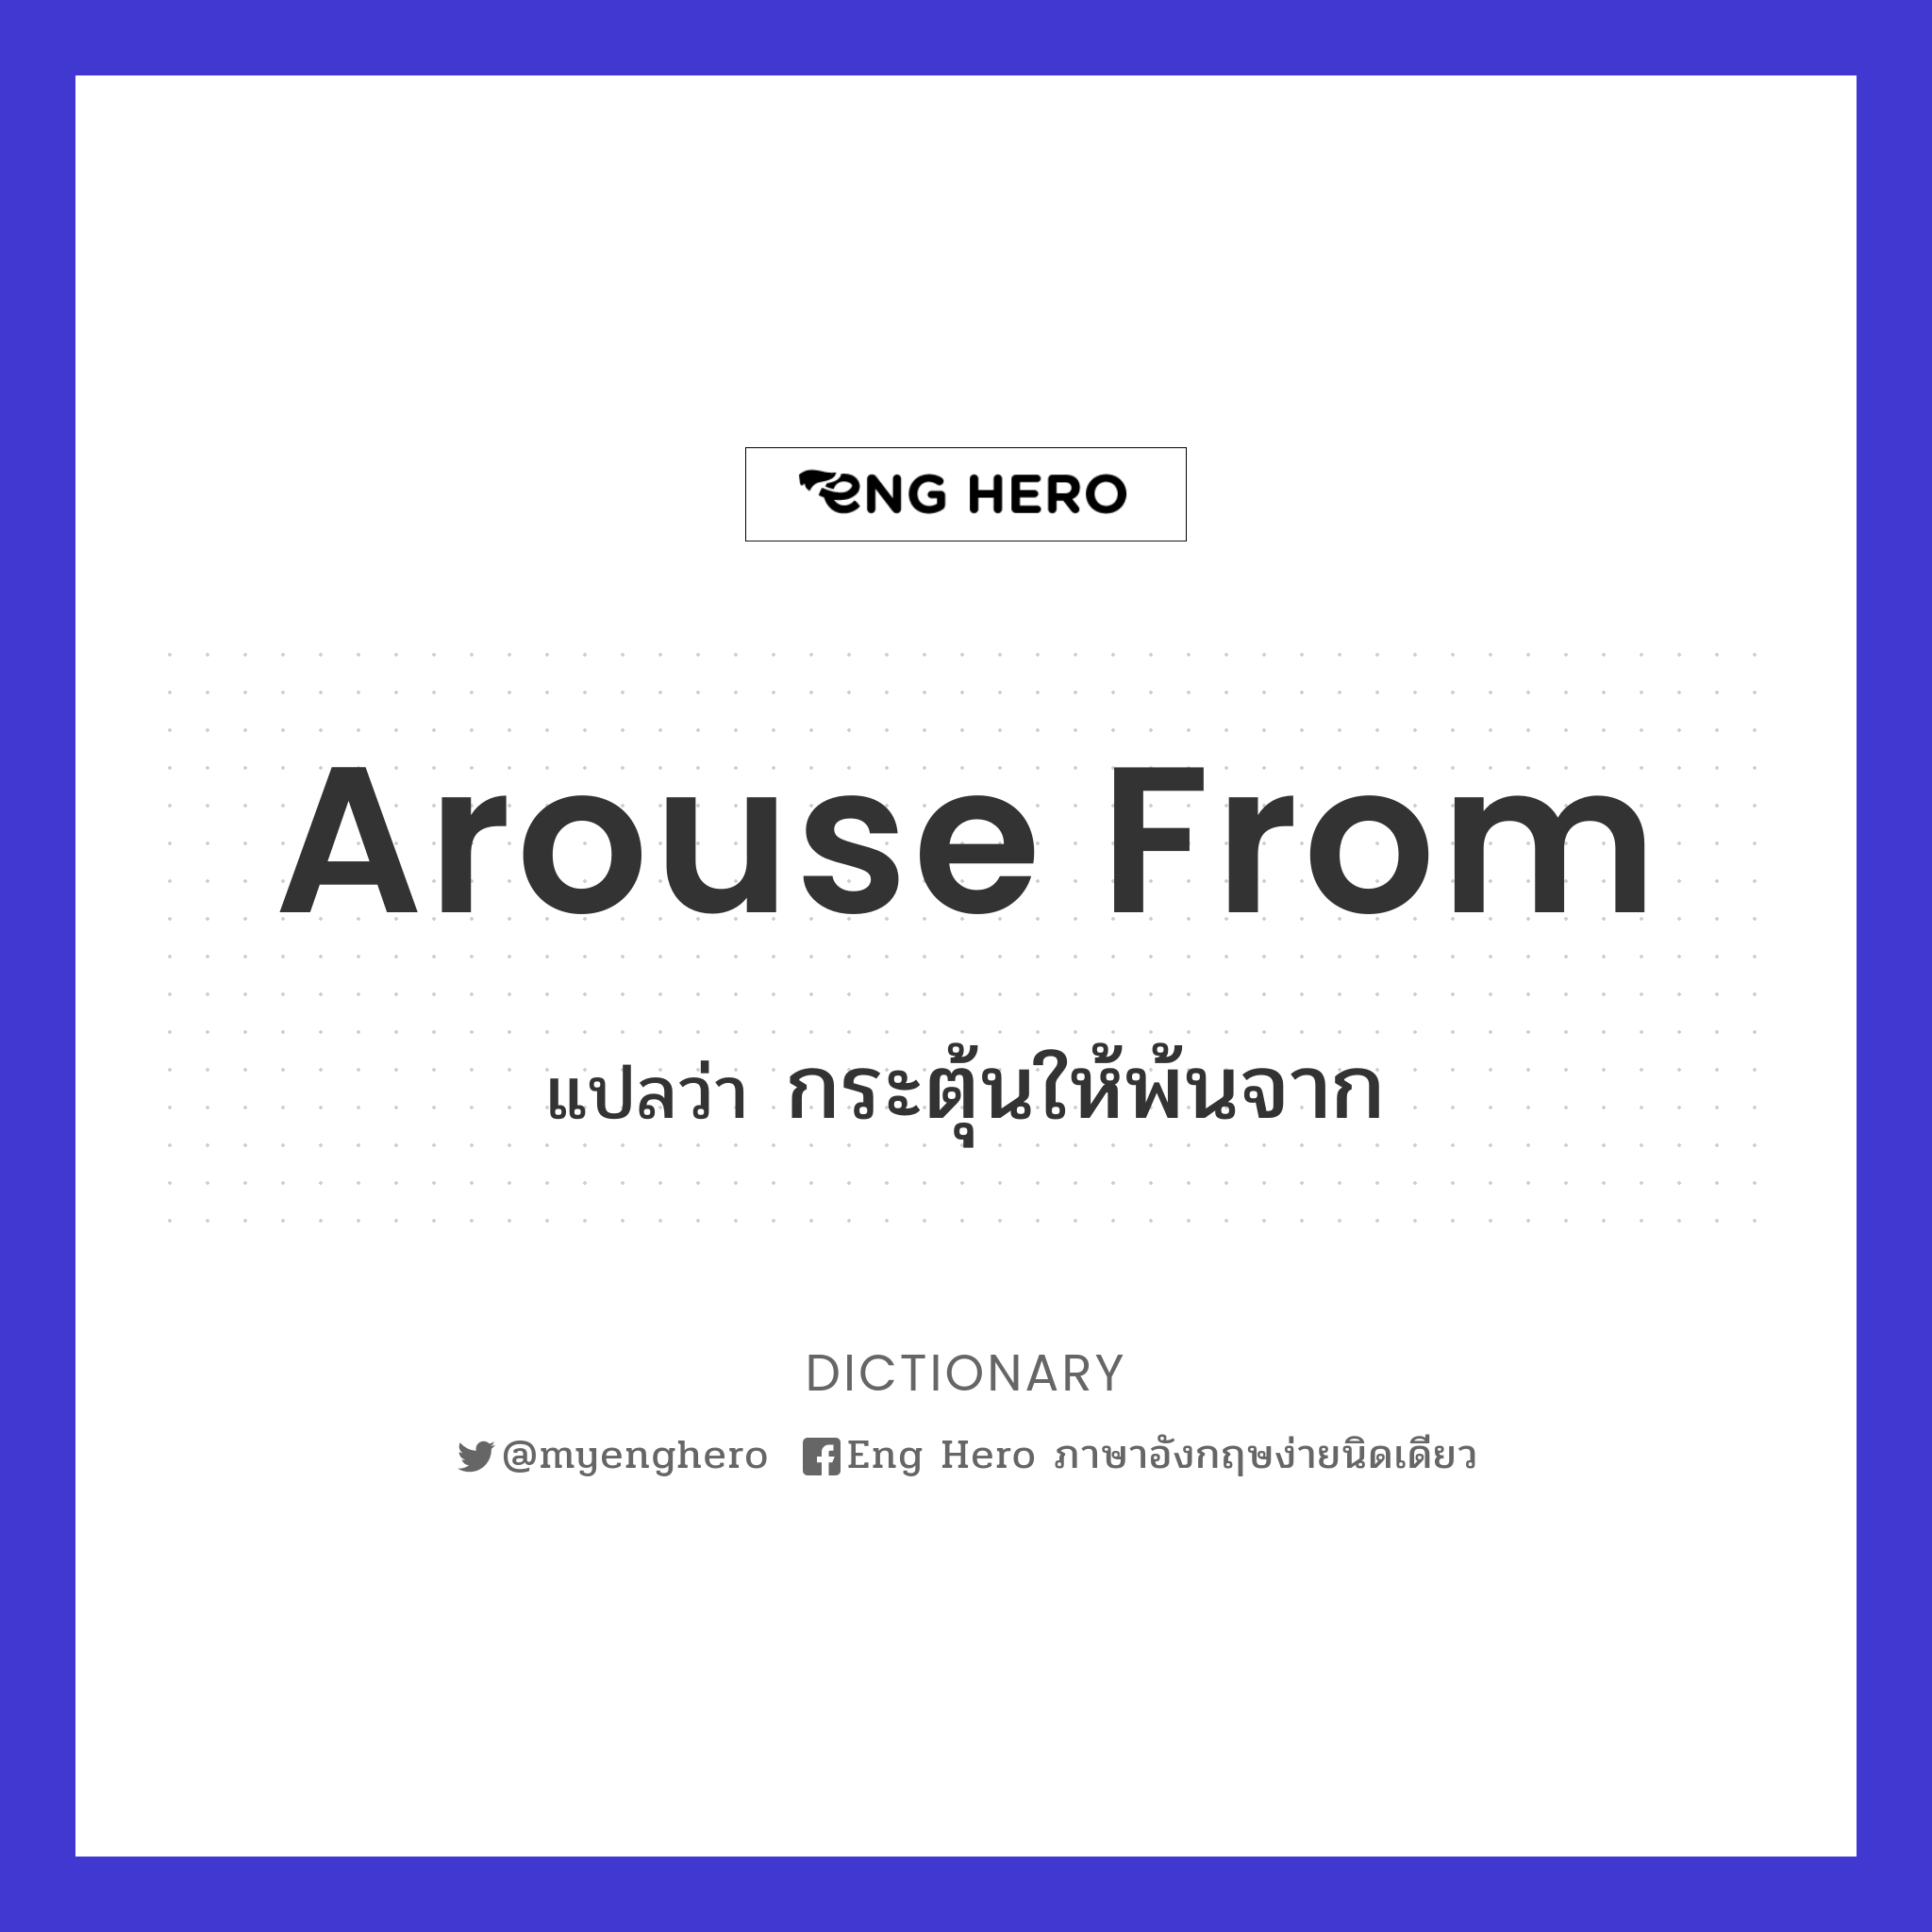 arouse from